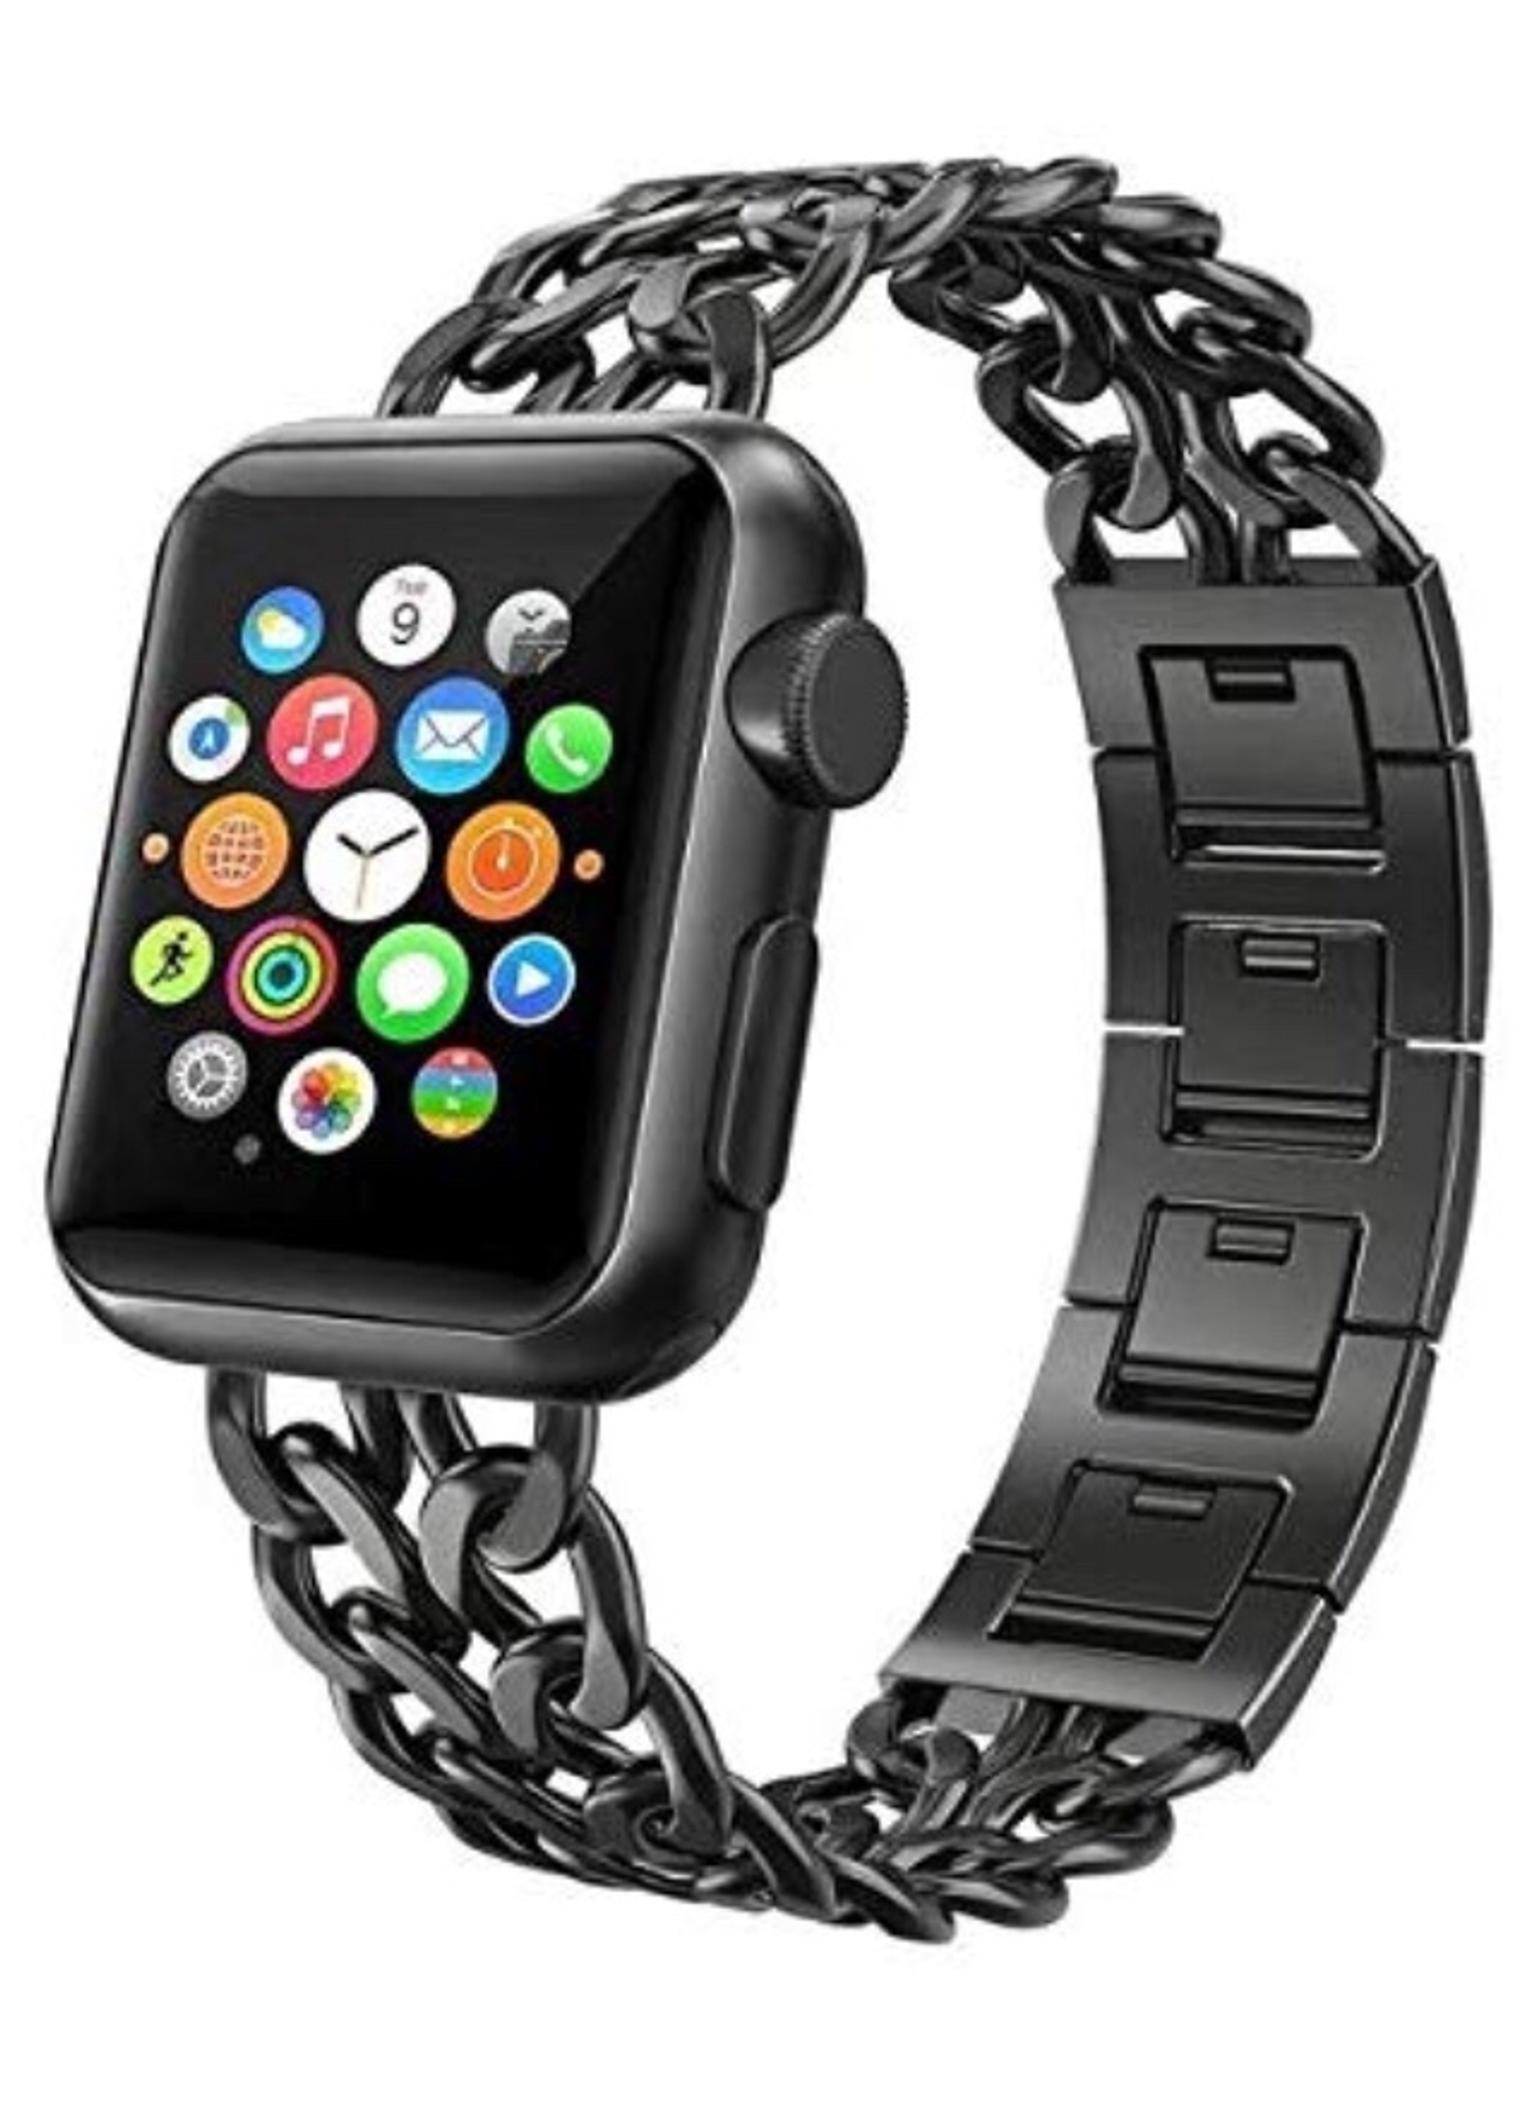 Apple Watch 42mm Armband In Goppingen For 00 For Sale Shpock